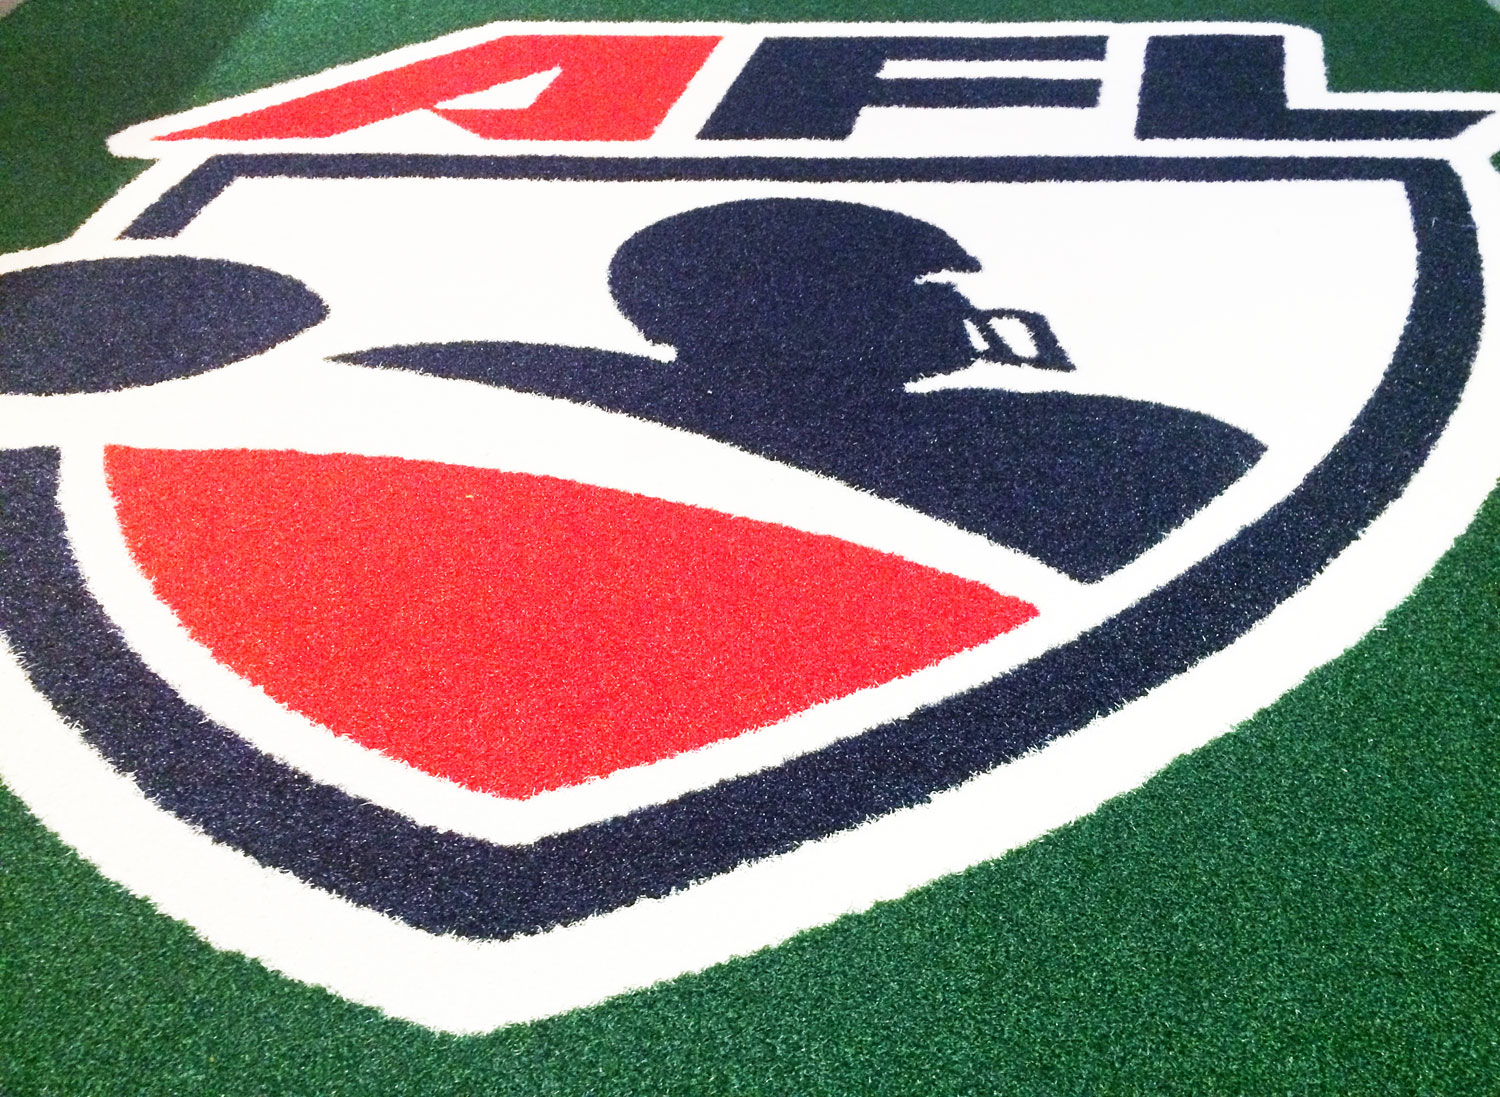 The Arena Football League logo was on display in many places Wednesday. (WTOP/Noah Frank)